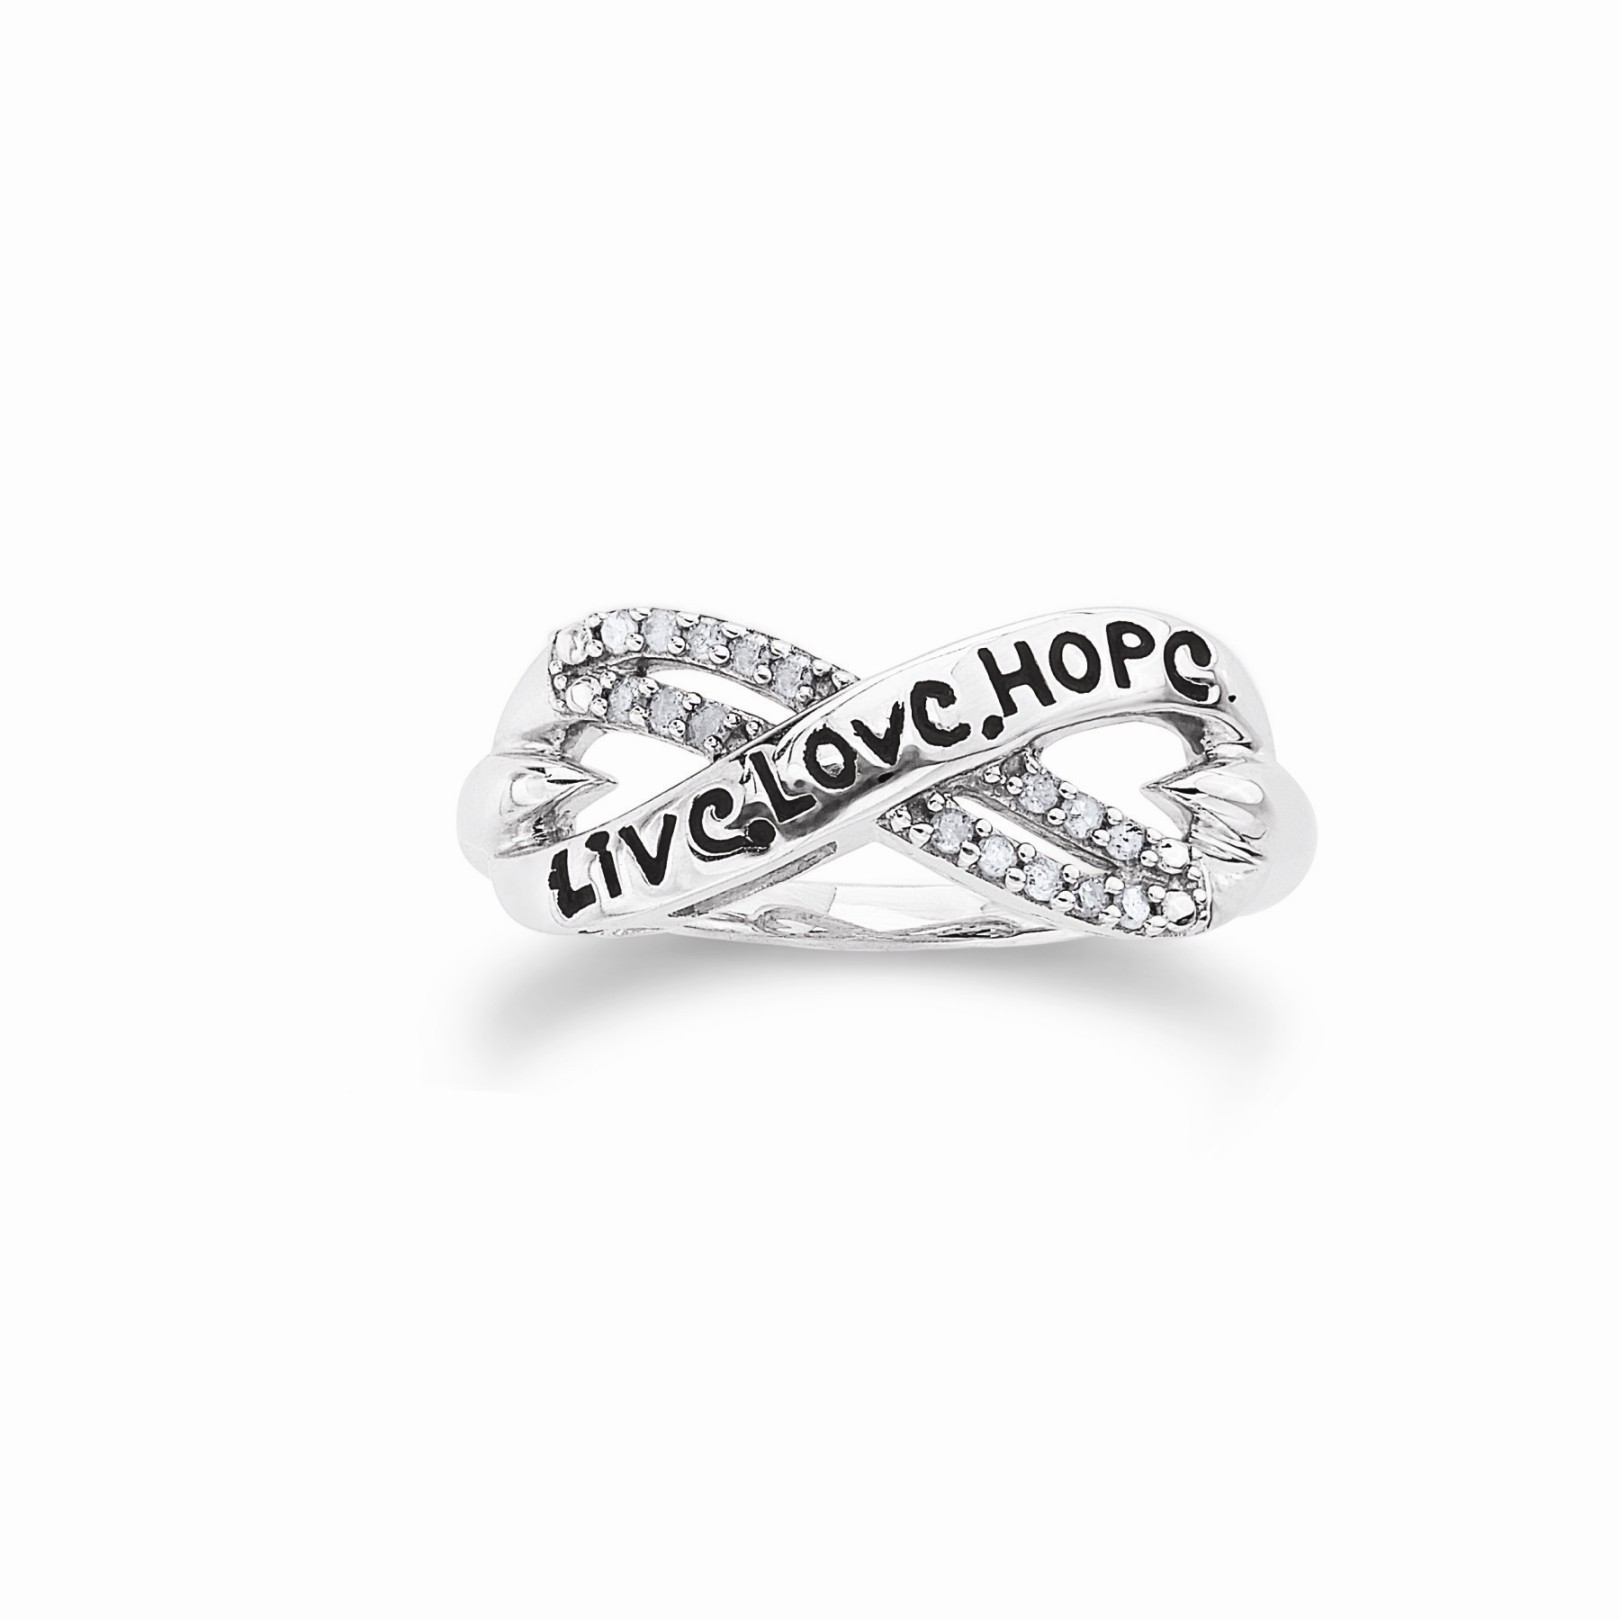 CITY OF HOPE 0.10ctw  Sterling Silver Infinity Ring